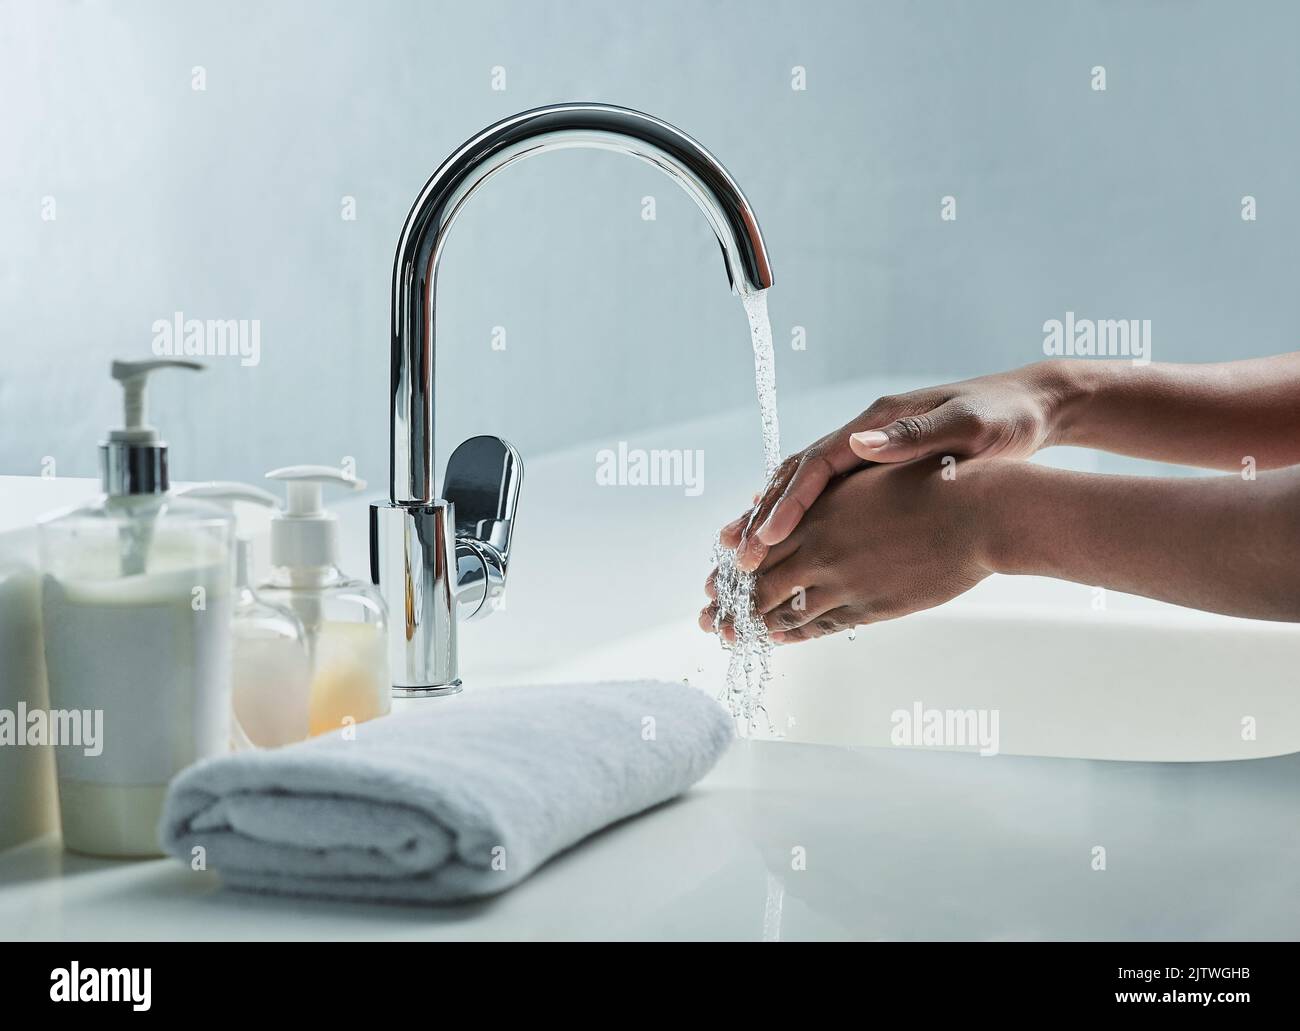 Say goodby to bacteria. a man washing his hands in a bathroom sink. Stock Photo